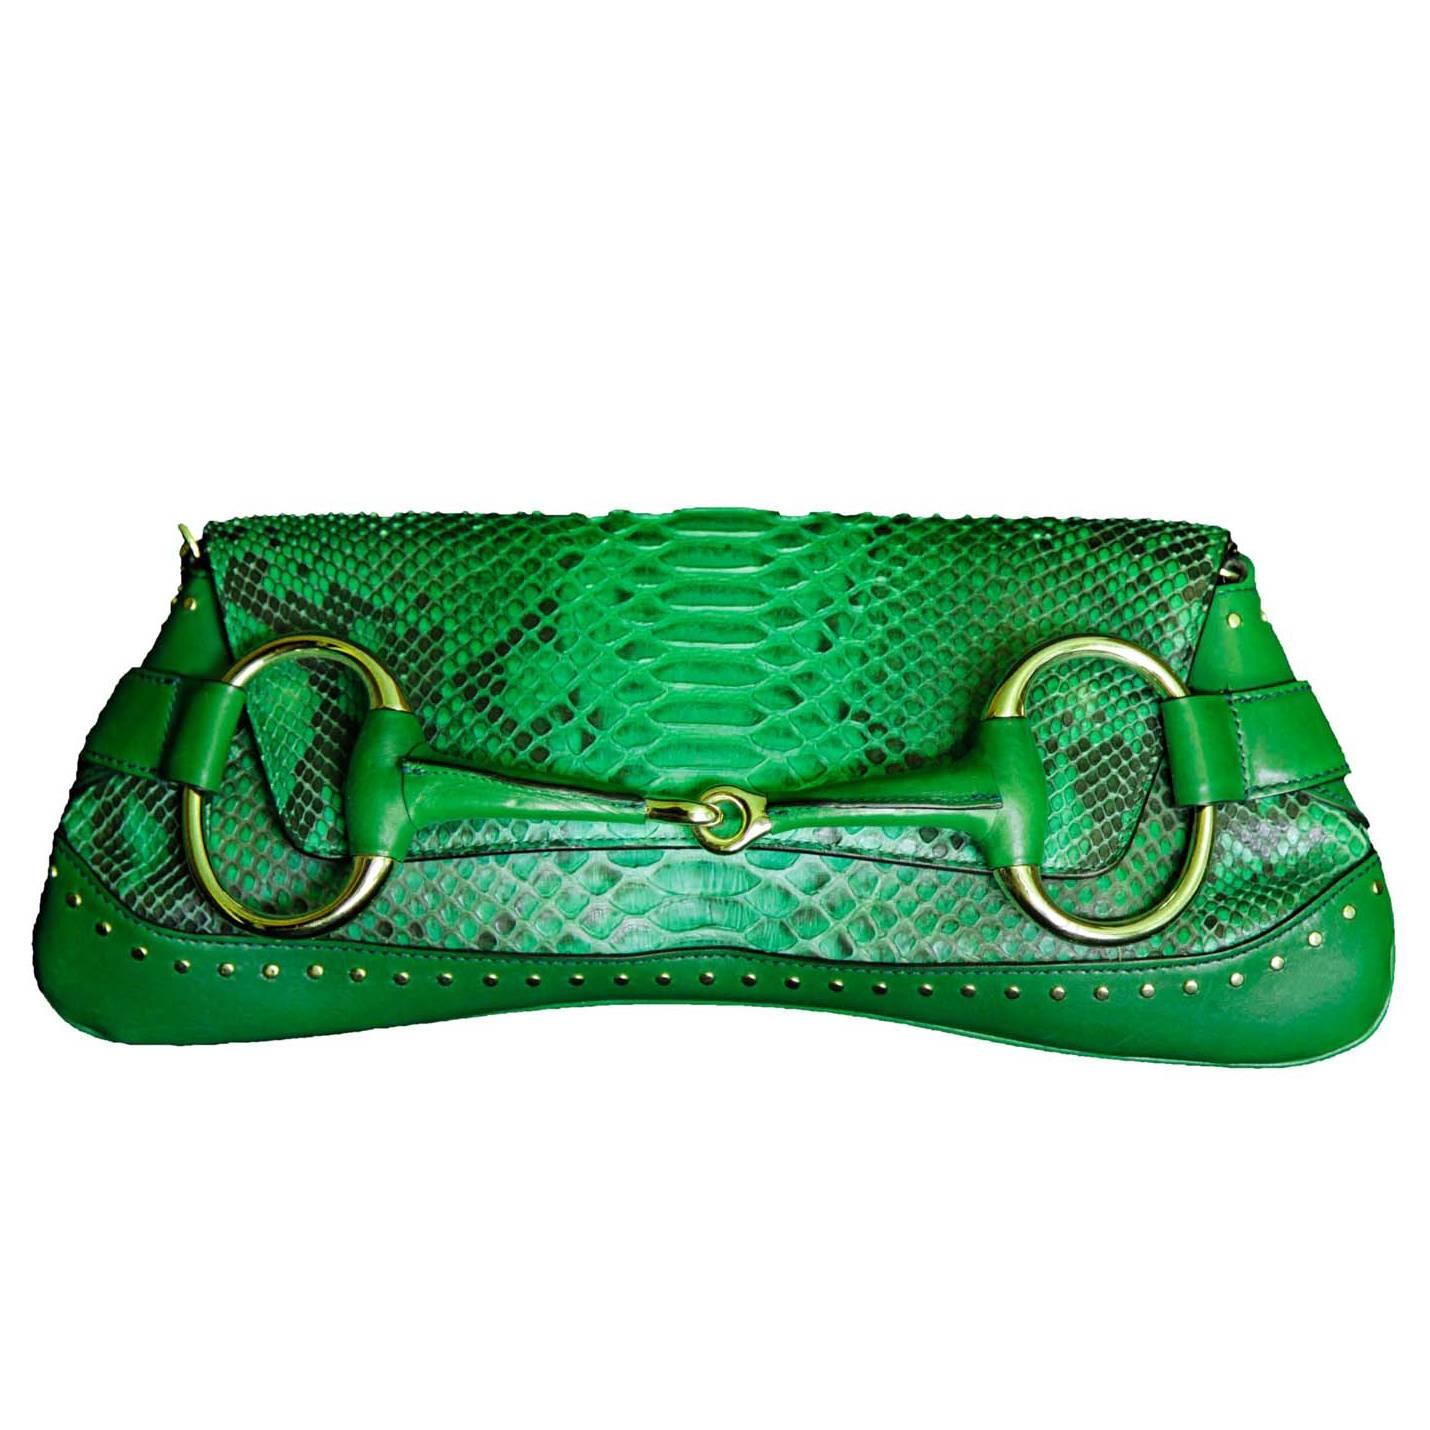 That Incredible Green Python Tom Ford For Gucci SS 2002 Collection Horsebit Bag!